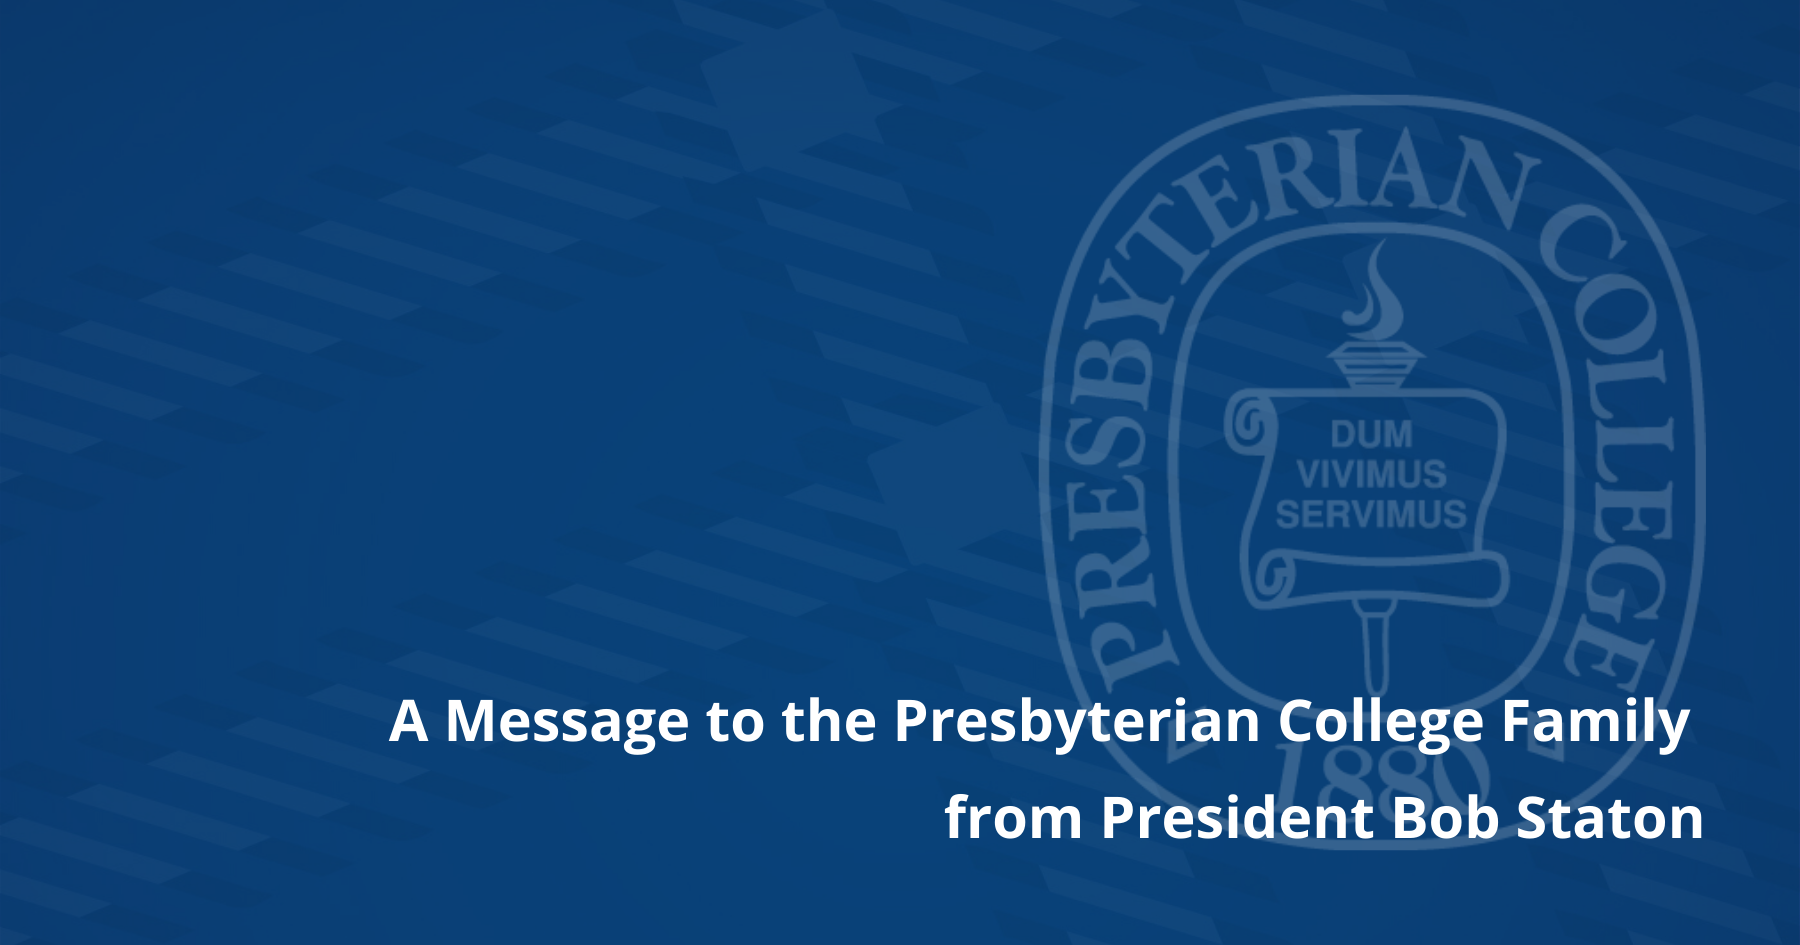 A Message to the Presbyterian College Family from President Bob Staton